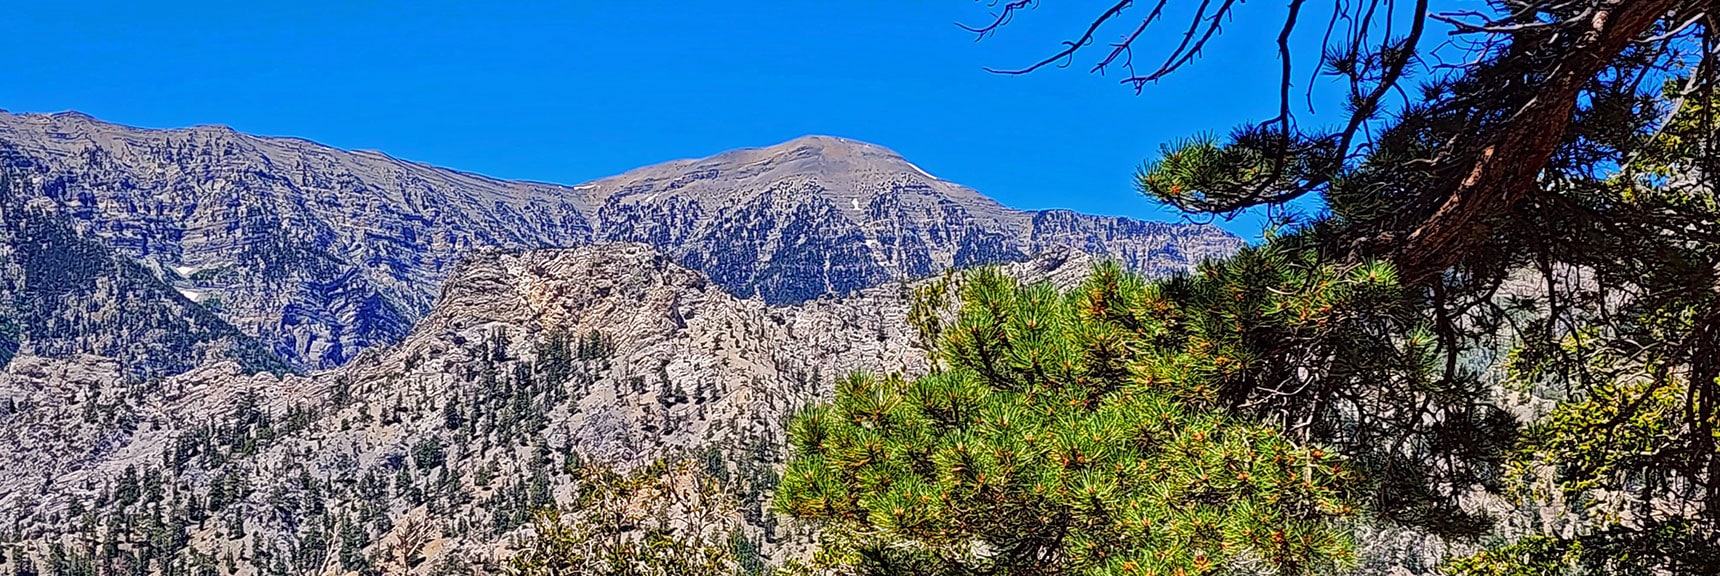 Cockscomb Ridge (foreground) and Charleston Peak (background) Coming into View | Fletcher Canyon / Fletcher Peak / Cockscomb Ridge Circuit | Mt. Charleston Wilderness | Spring Mountains, Nevada